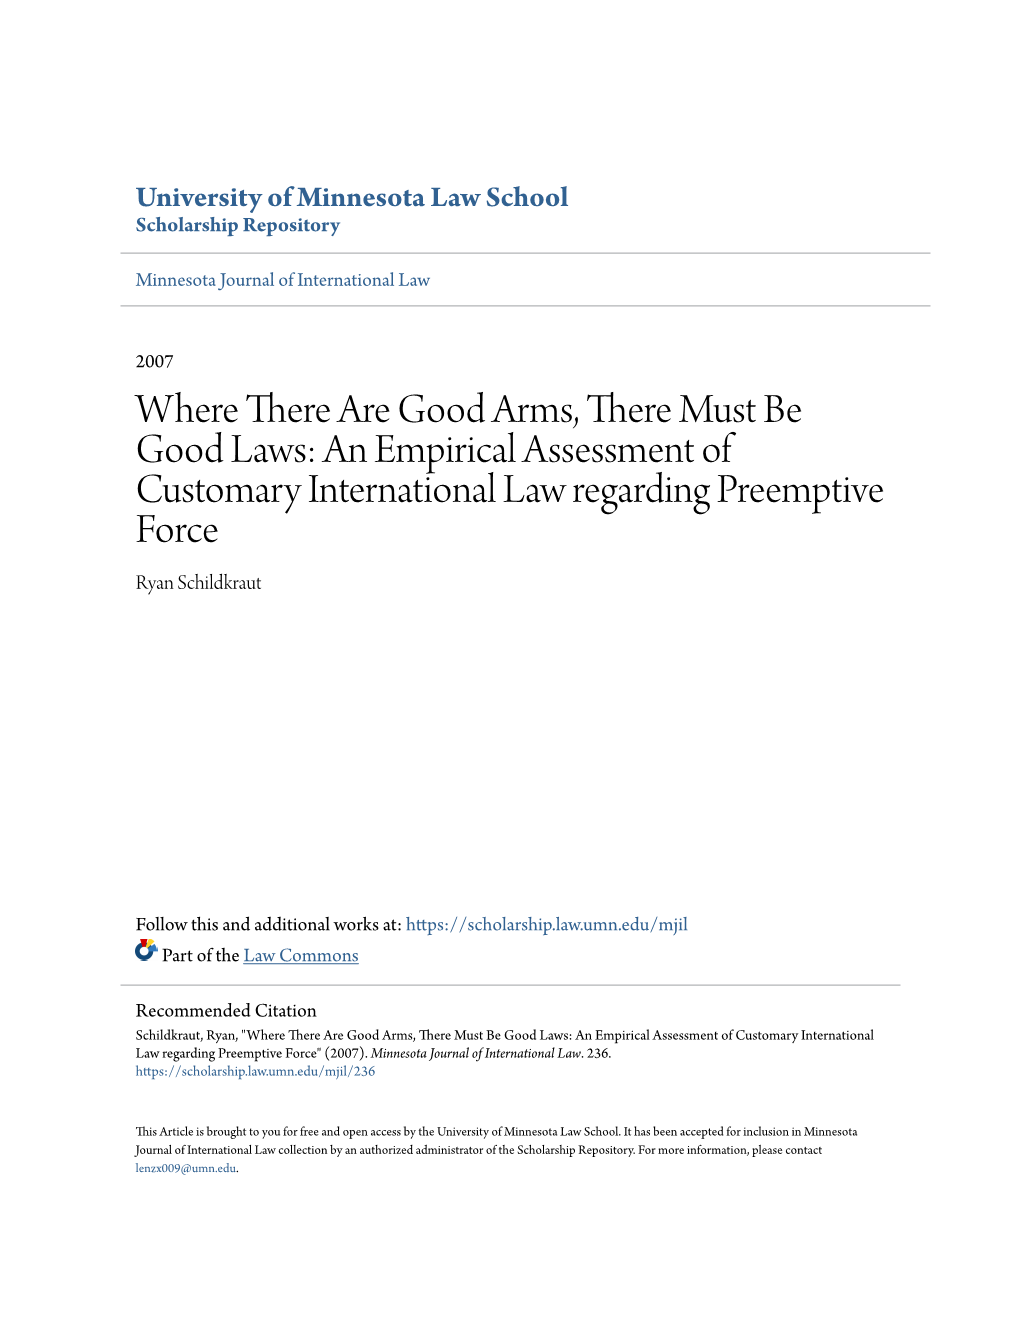 Where There Are Good Arms, There Must Be Good Laws: an Empirical Assessment of Customary International Law Regarding Preemptive Force Ryan Schildkraut